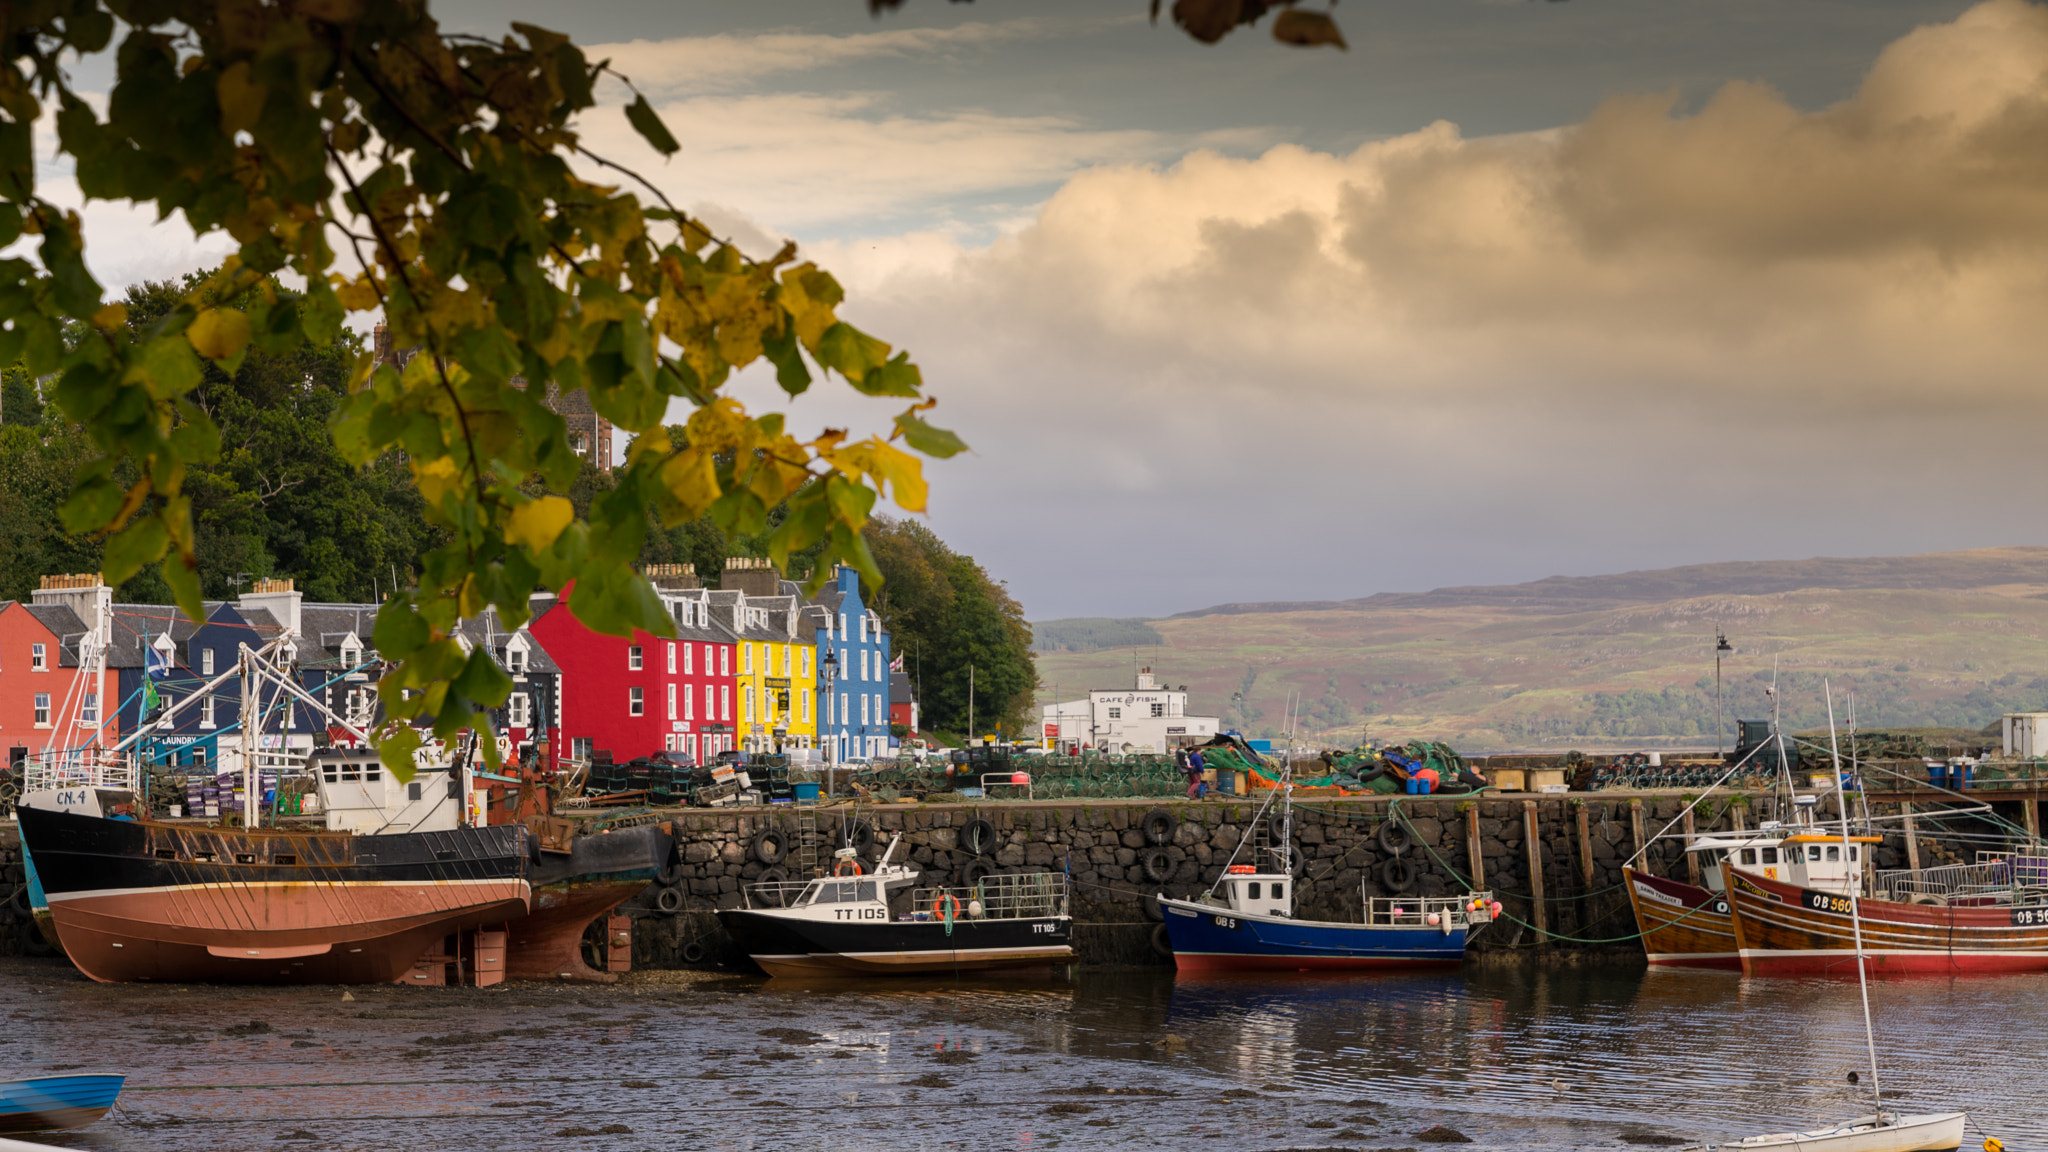 Sony a7 sample photo. Tobermory town 1 photography